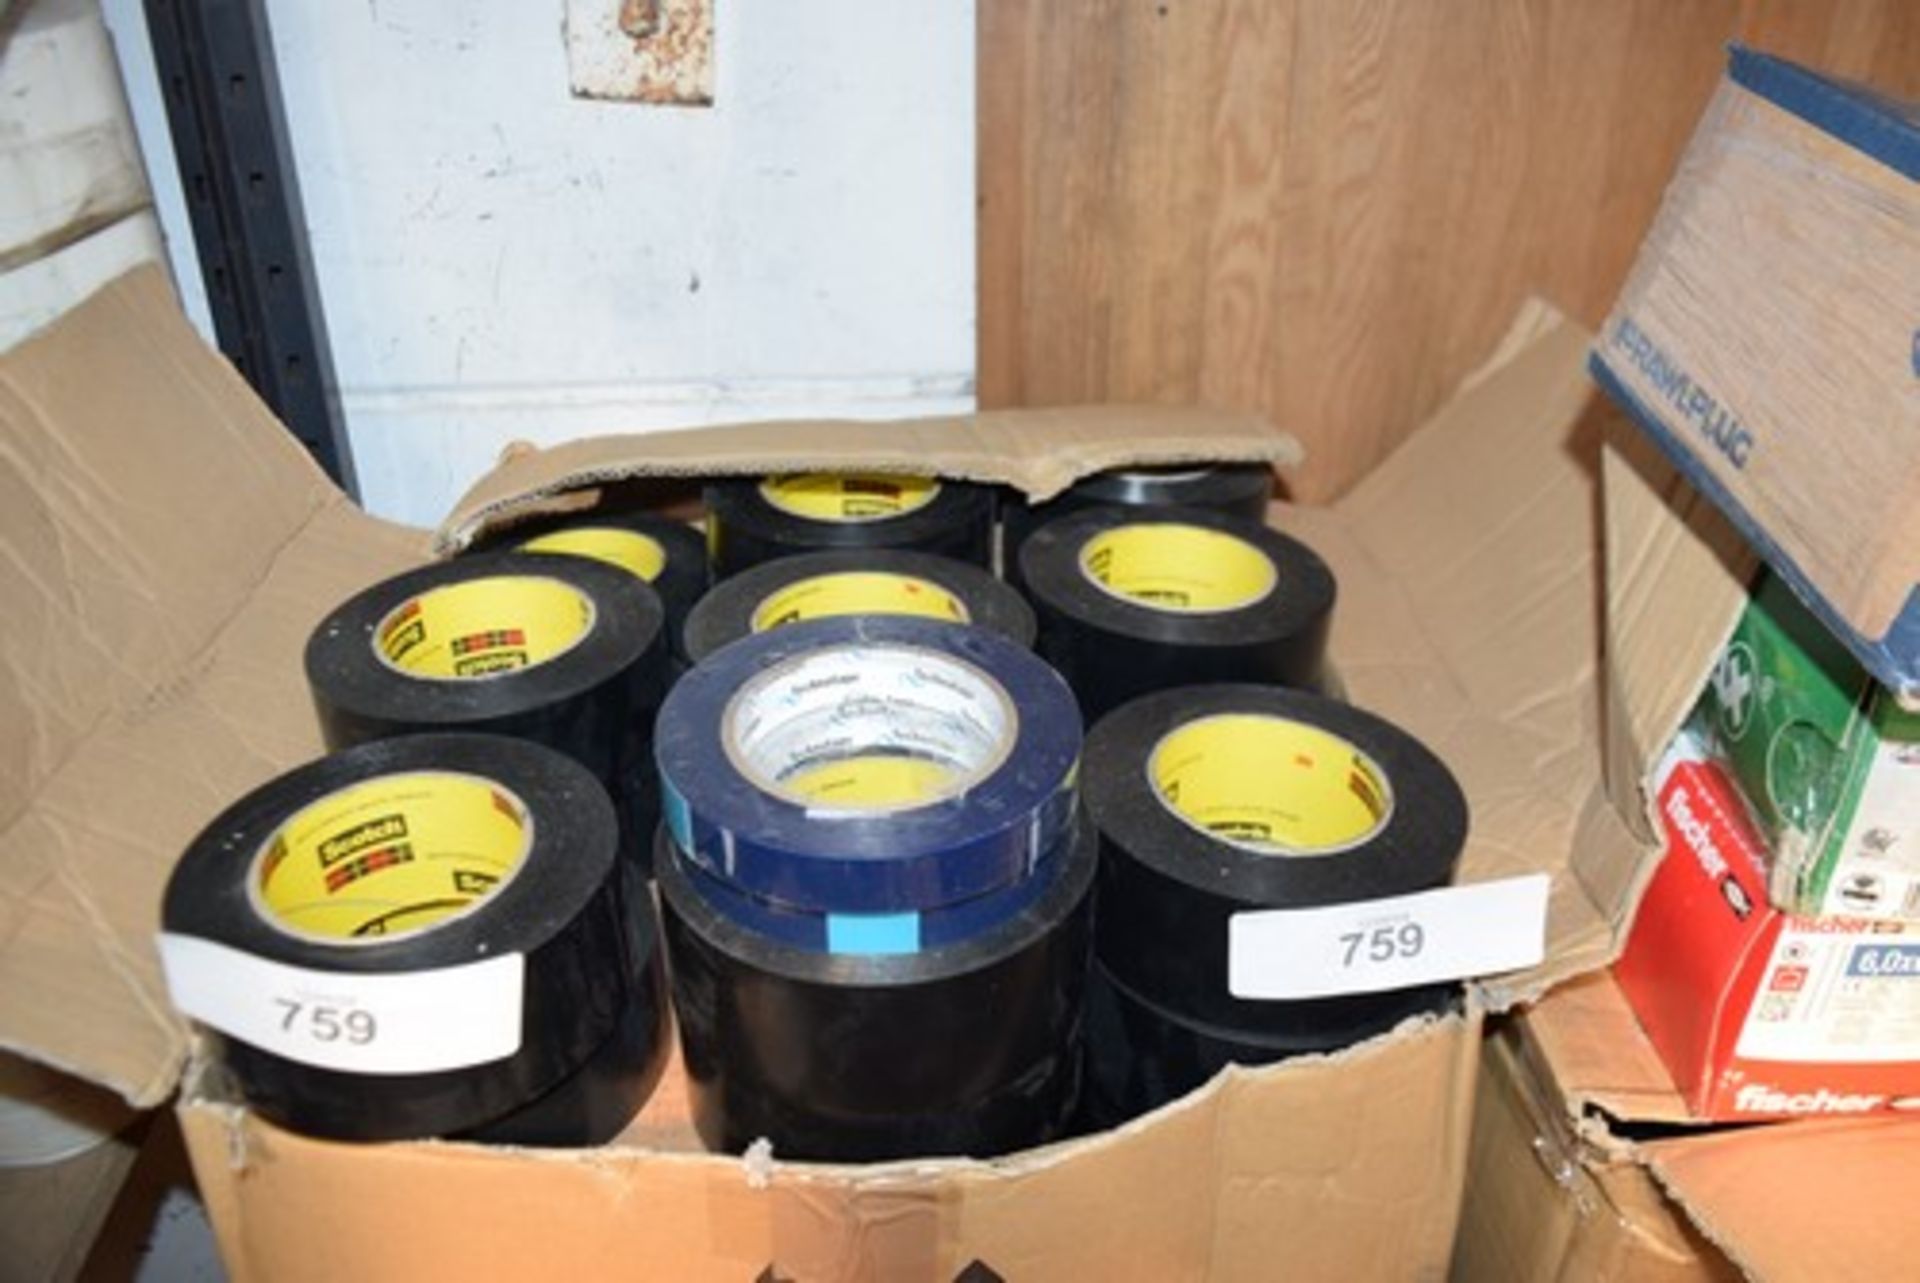 43 x Scotch black PVC tape, 50mm wide and 2 rolls of blue Technotape, 20mm wide - new (GS0)